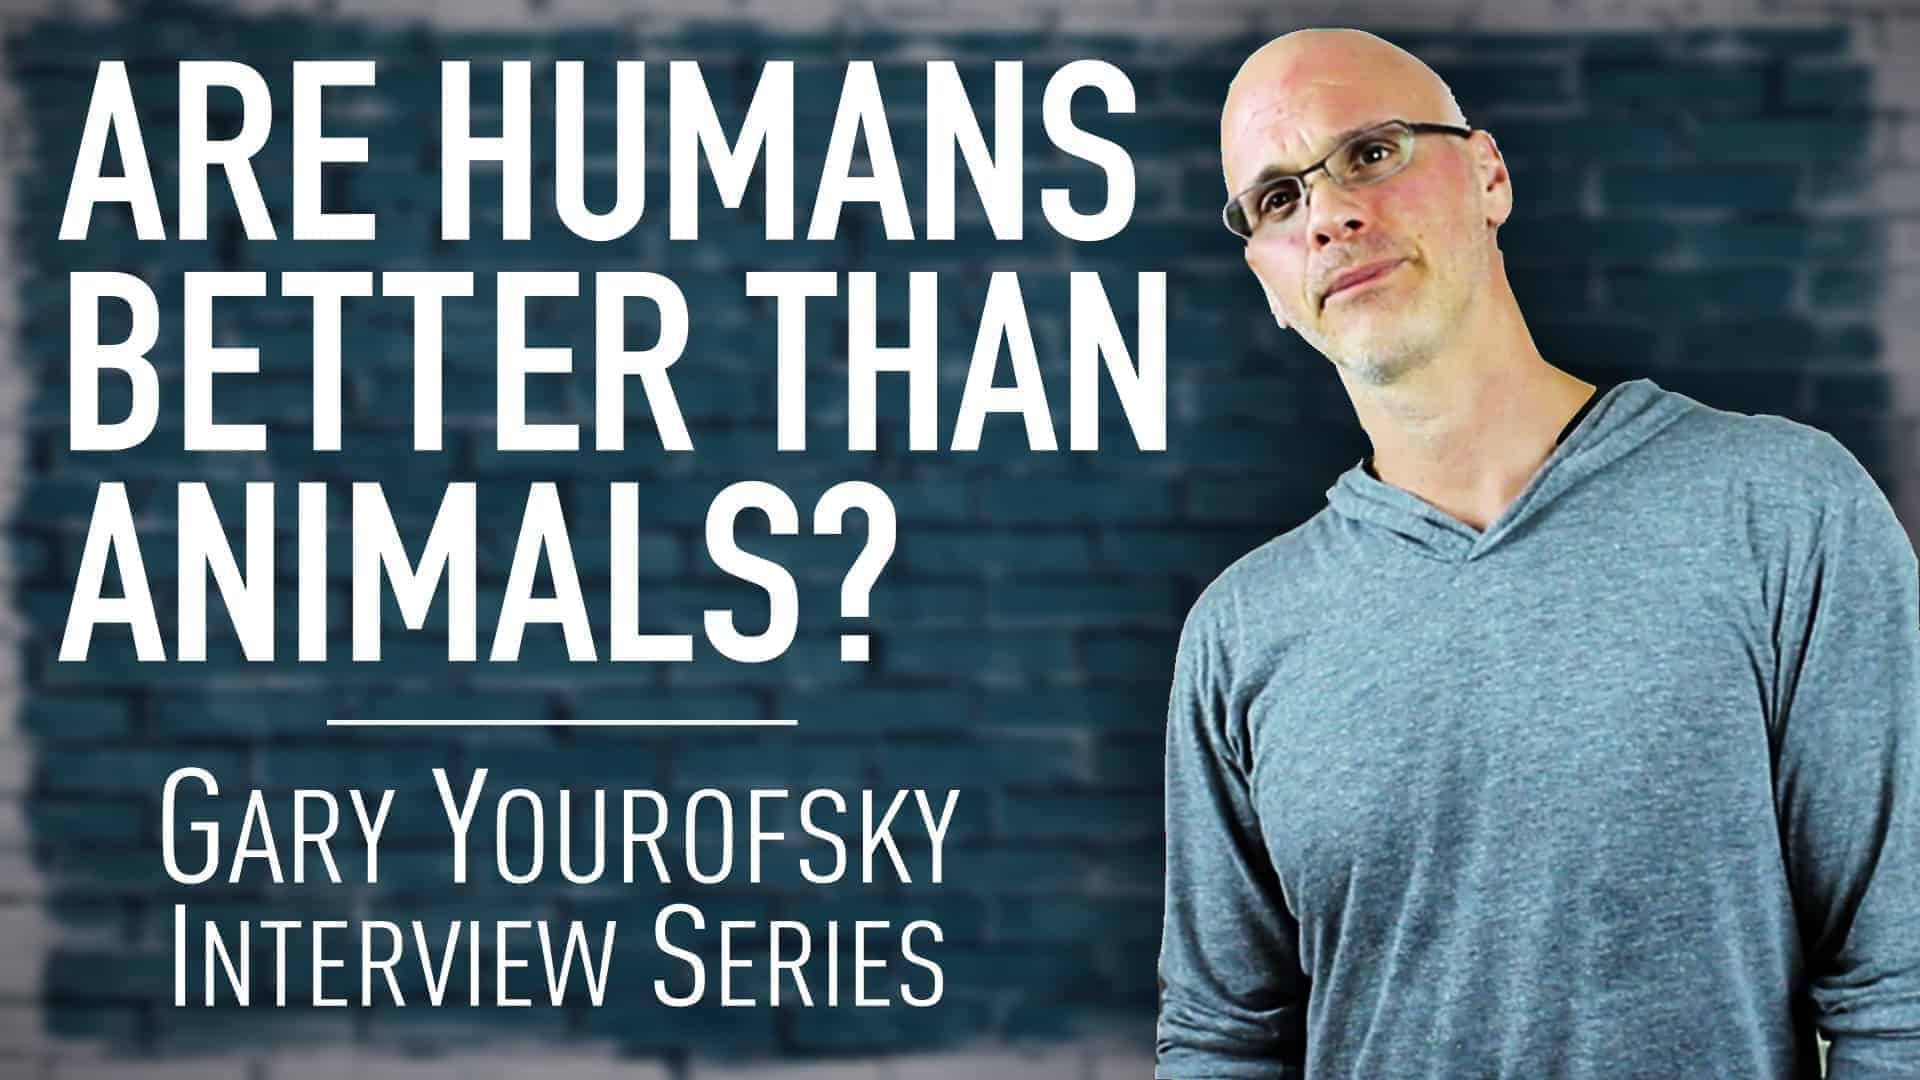 Are Humans Better Than Animals? | Gary Yourofsky